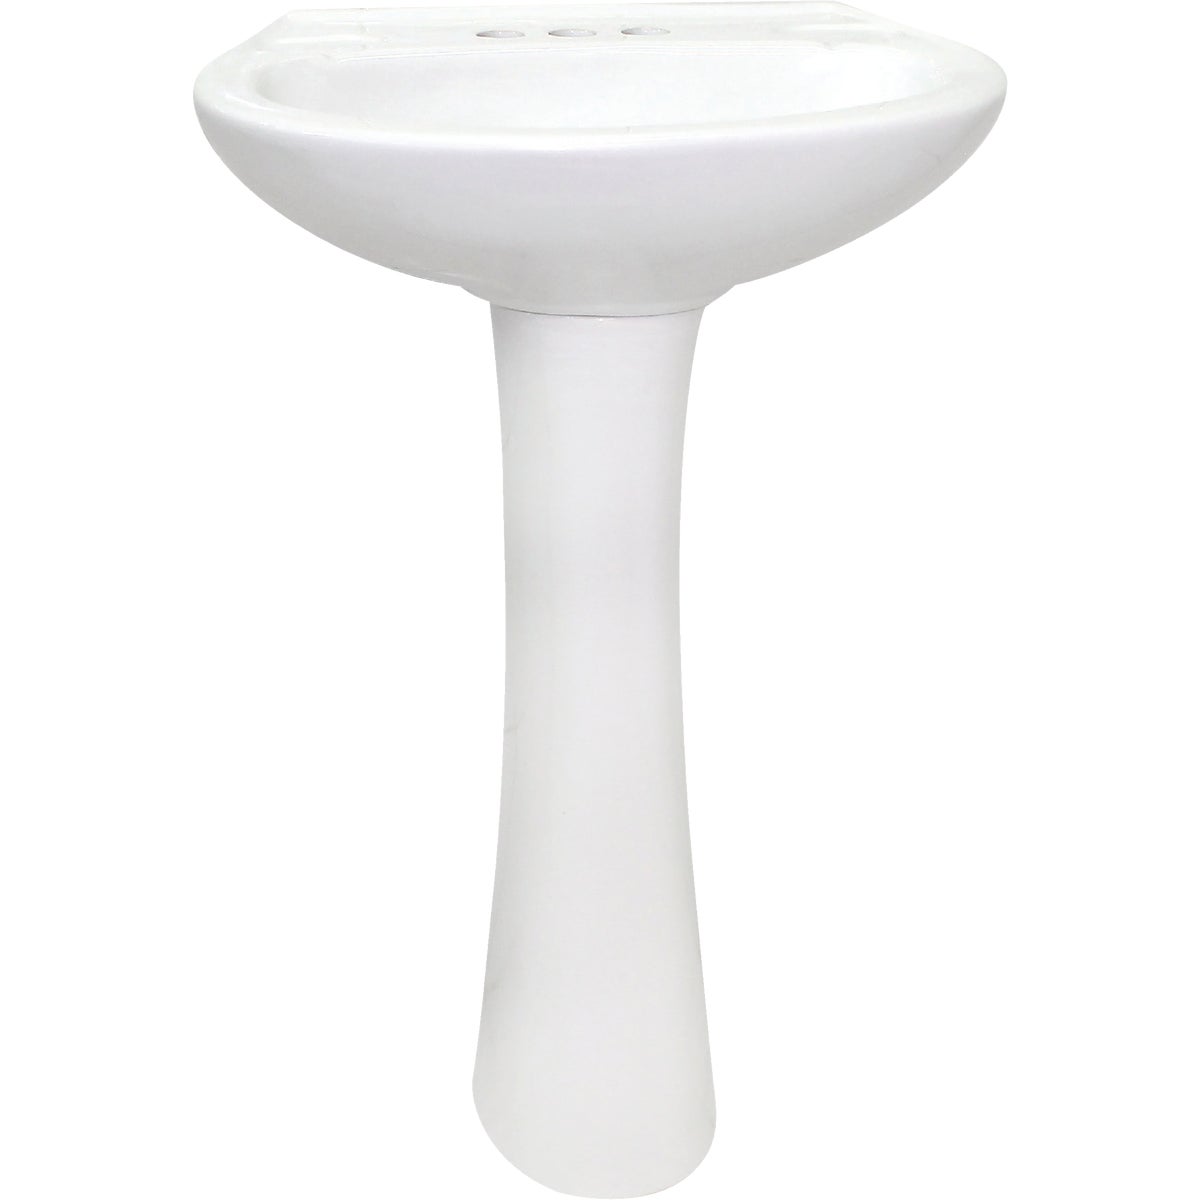 Cato Terra White Vitreous China Pedestal Sink with 4 In. Centers